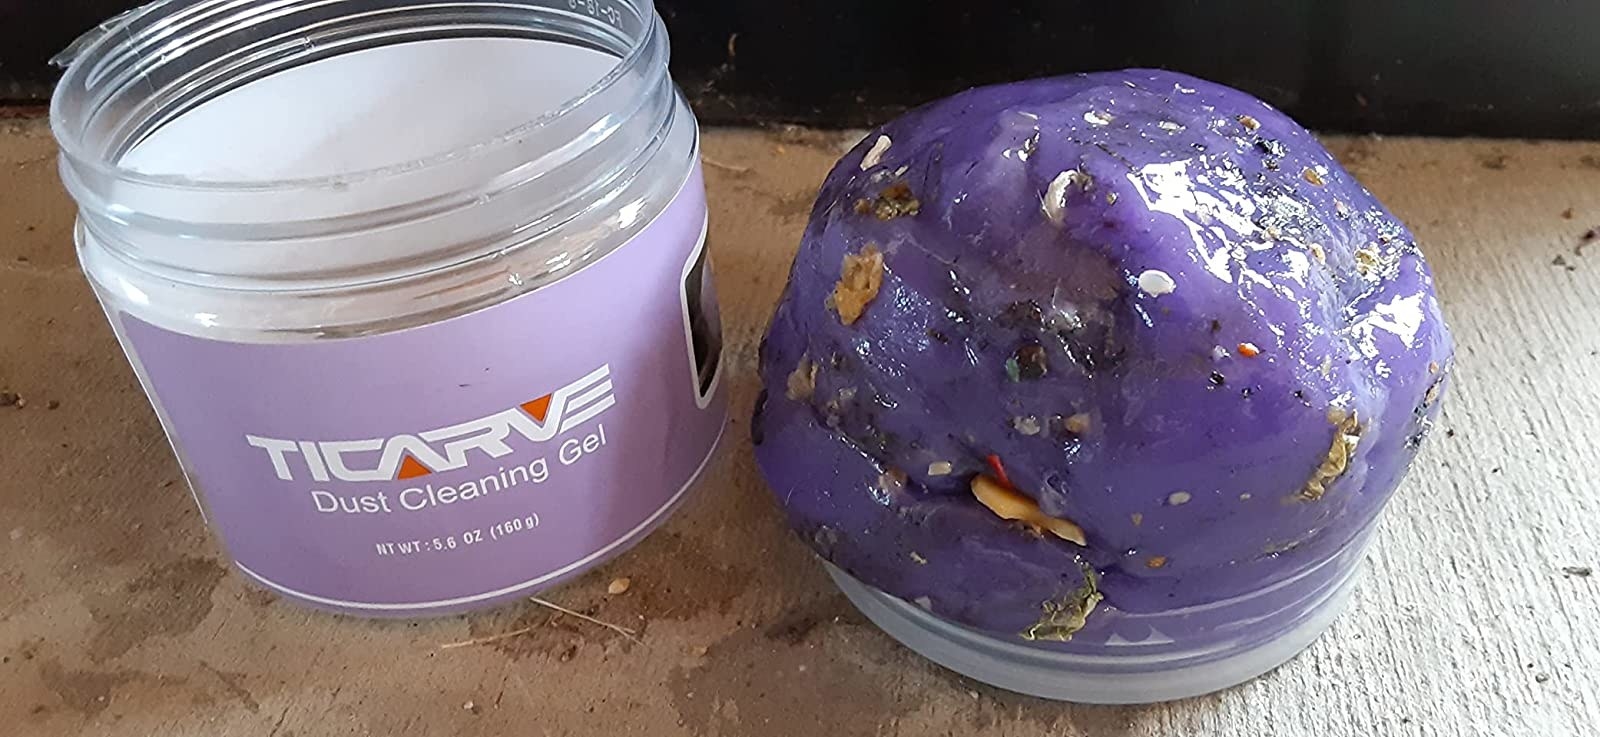 a reviewer photo of the purple cleaning gel with a ton of crumbs and particles stuck in it